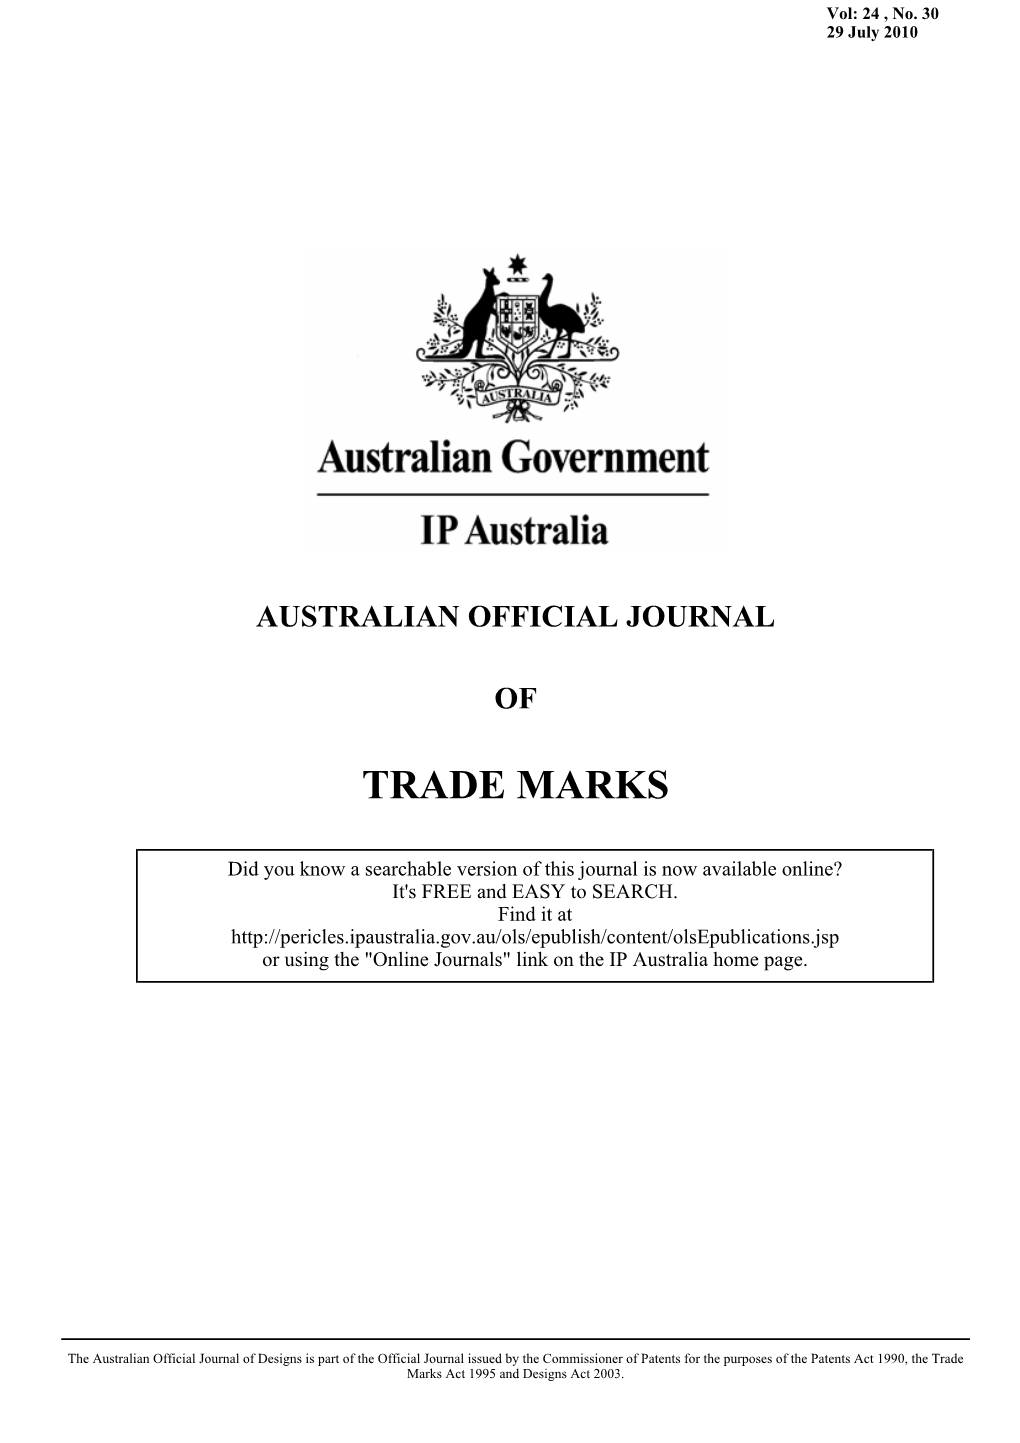 AUSTRALIAN OFFICIAL JOURNAL of TRADE MARKS 29 July 2010